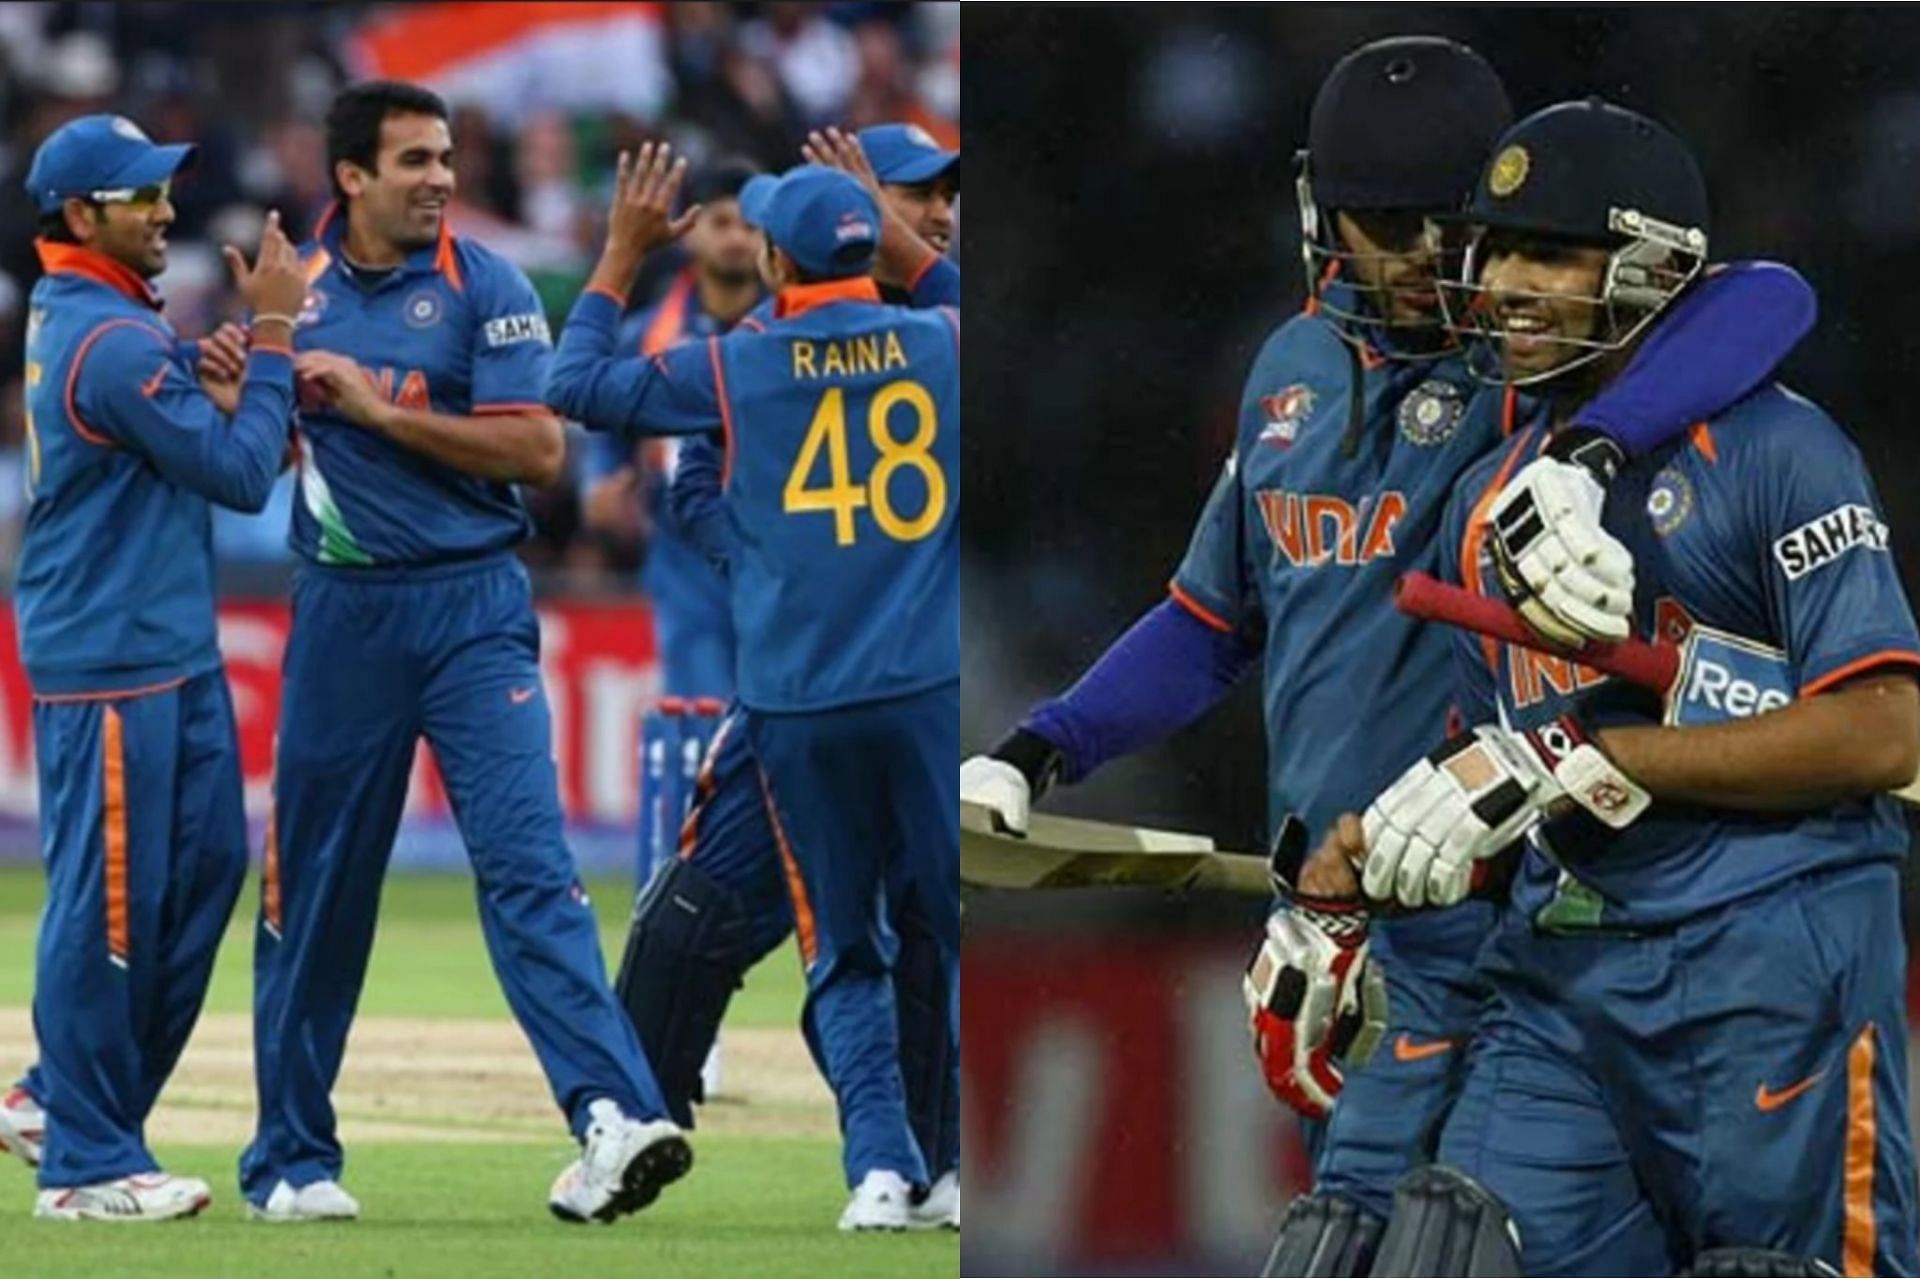 India played their first T20I against Ireland in 2009 [Getty Images]